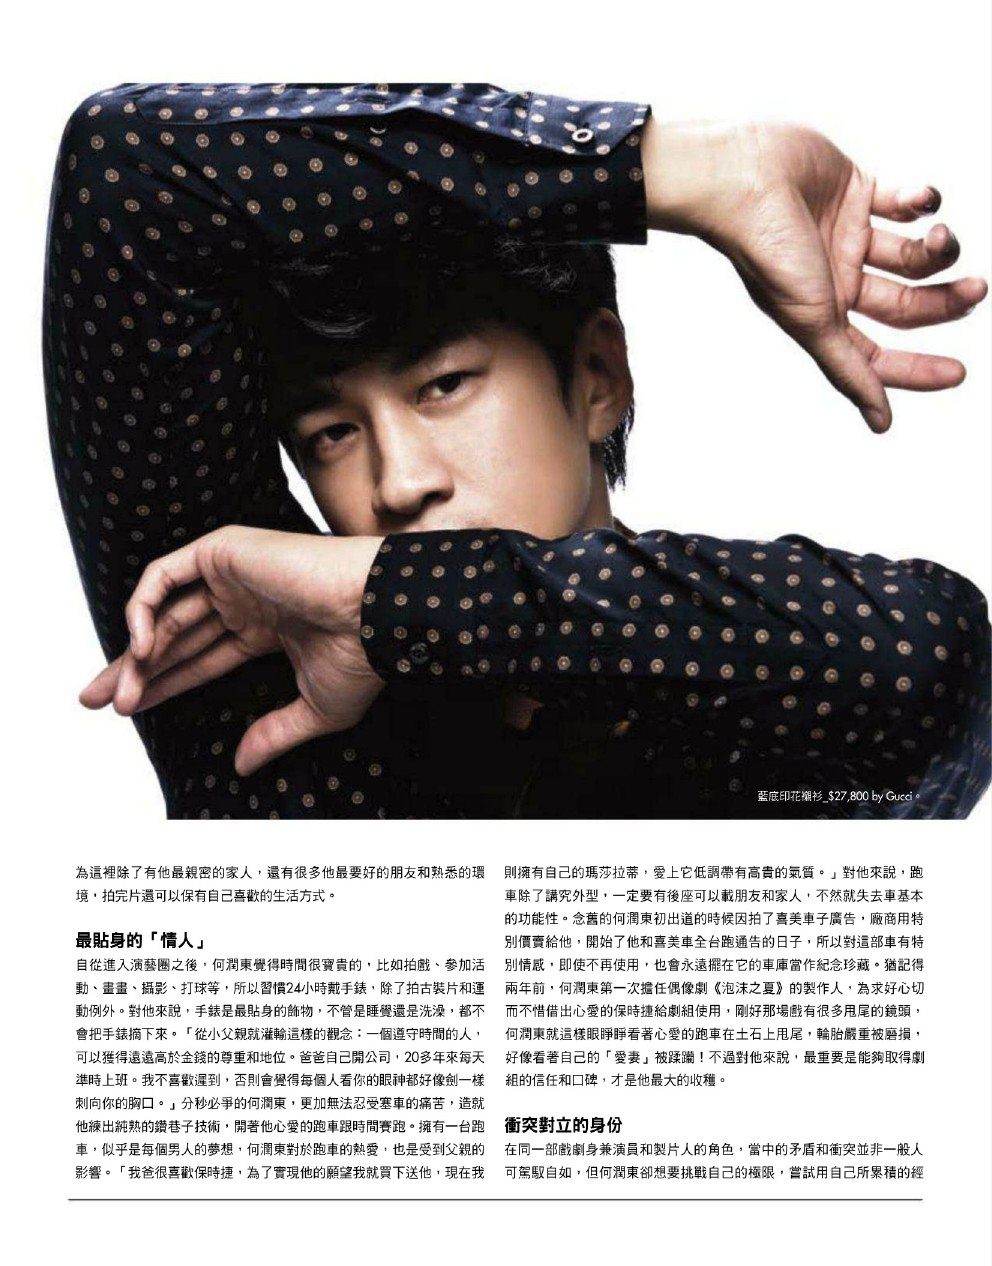 Esquire Taiwan issue 83 July 2012